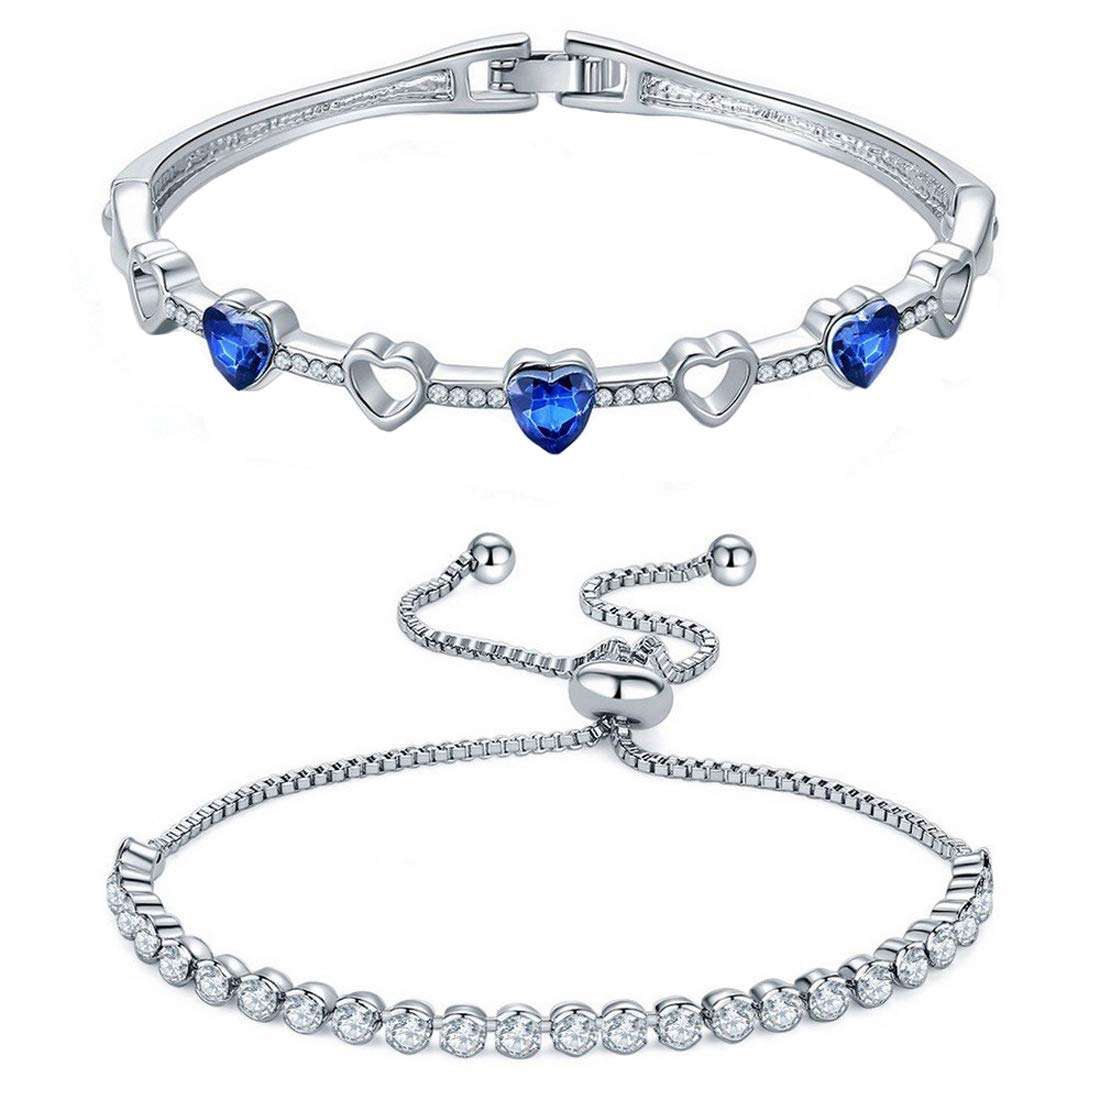 Yellow Chimes Crystal Bracelets for Women Combo of 2 Pcs Blue/White Crystals Bracelet Silver Chain Bracelets for Women and Girls.